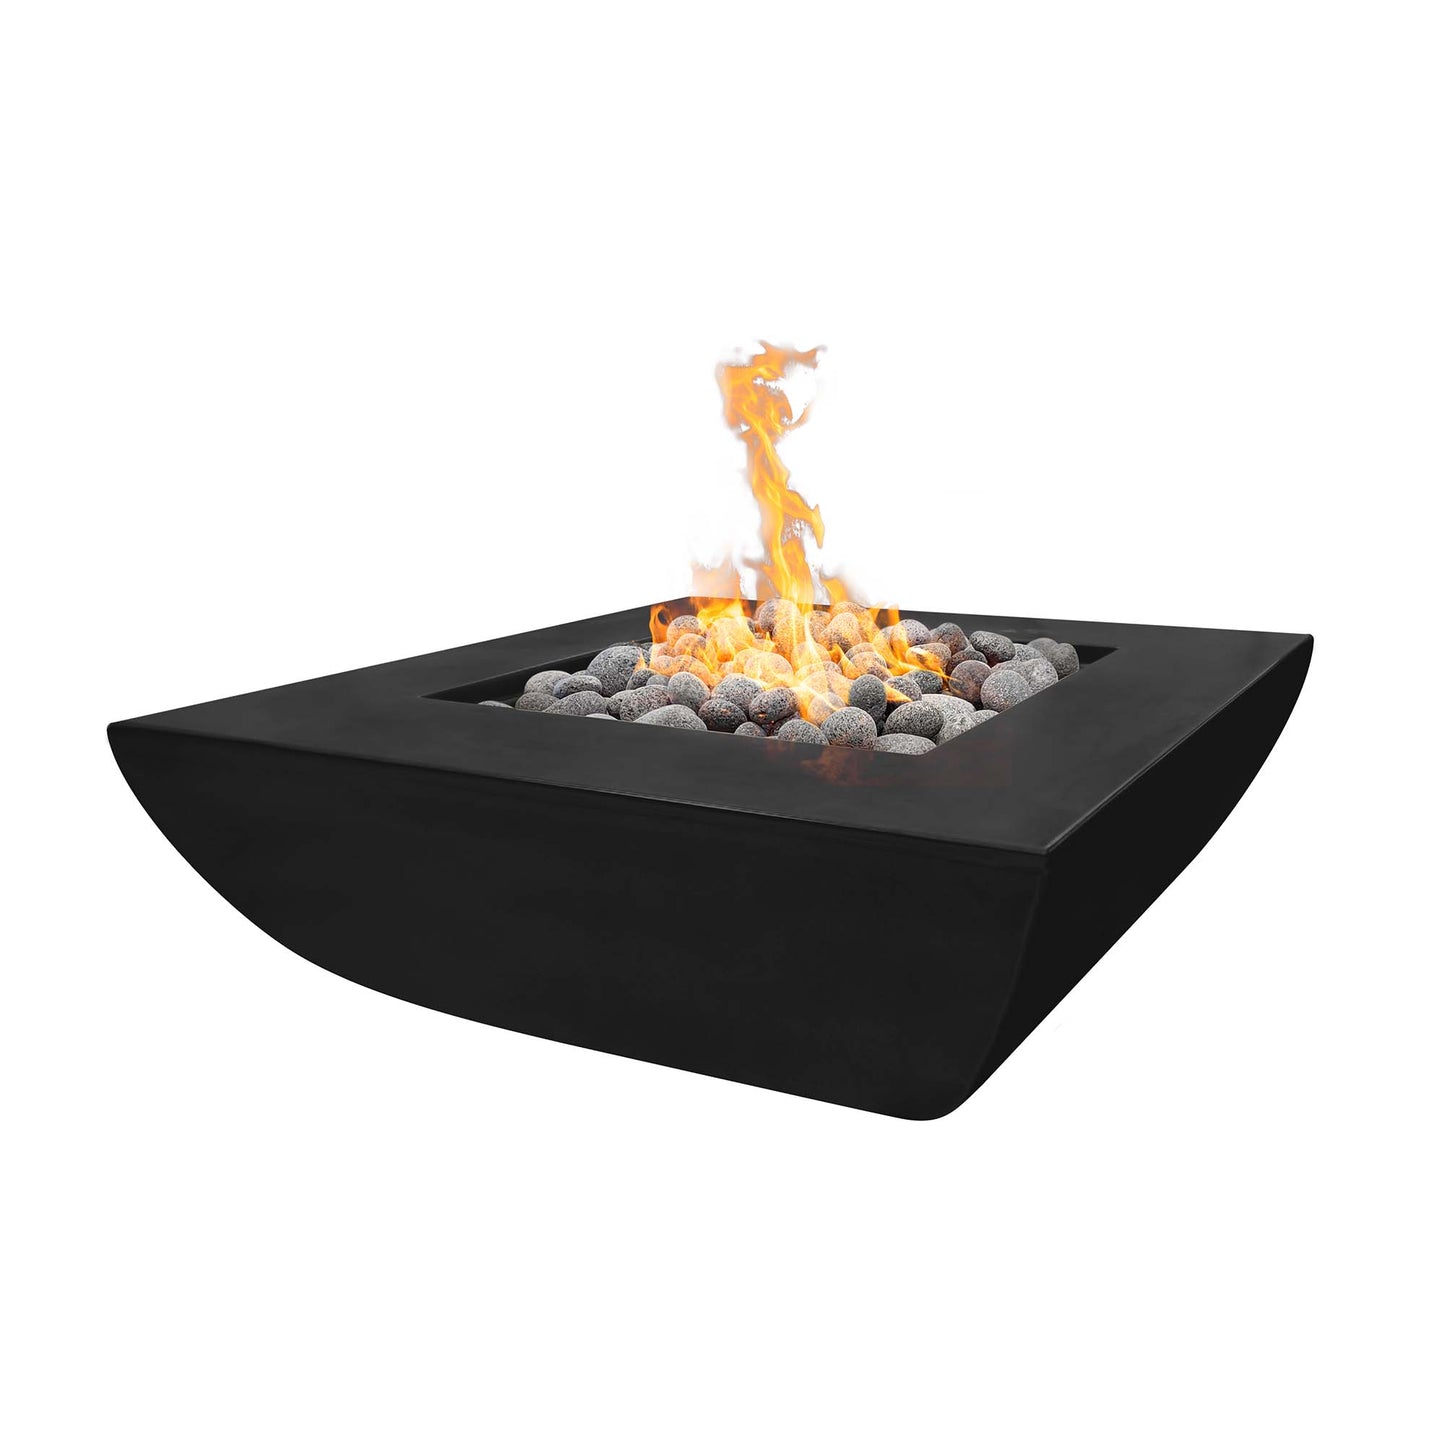 The Outdoor Plus Square Avalon 42" Metallic Copper GFRC Concrete Natural Gas Fire Pit with 110V Electronic Ignition